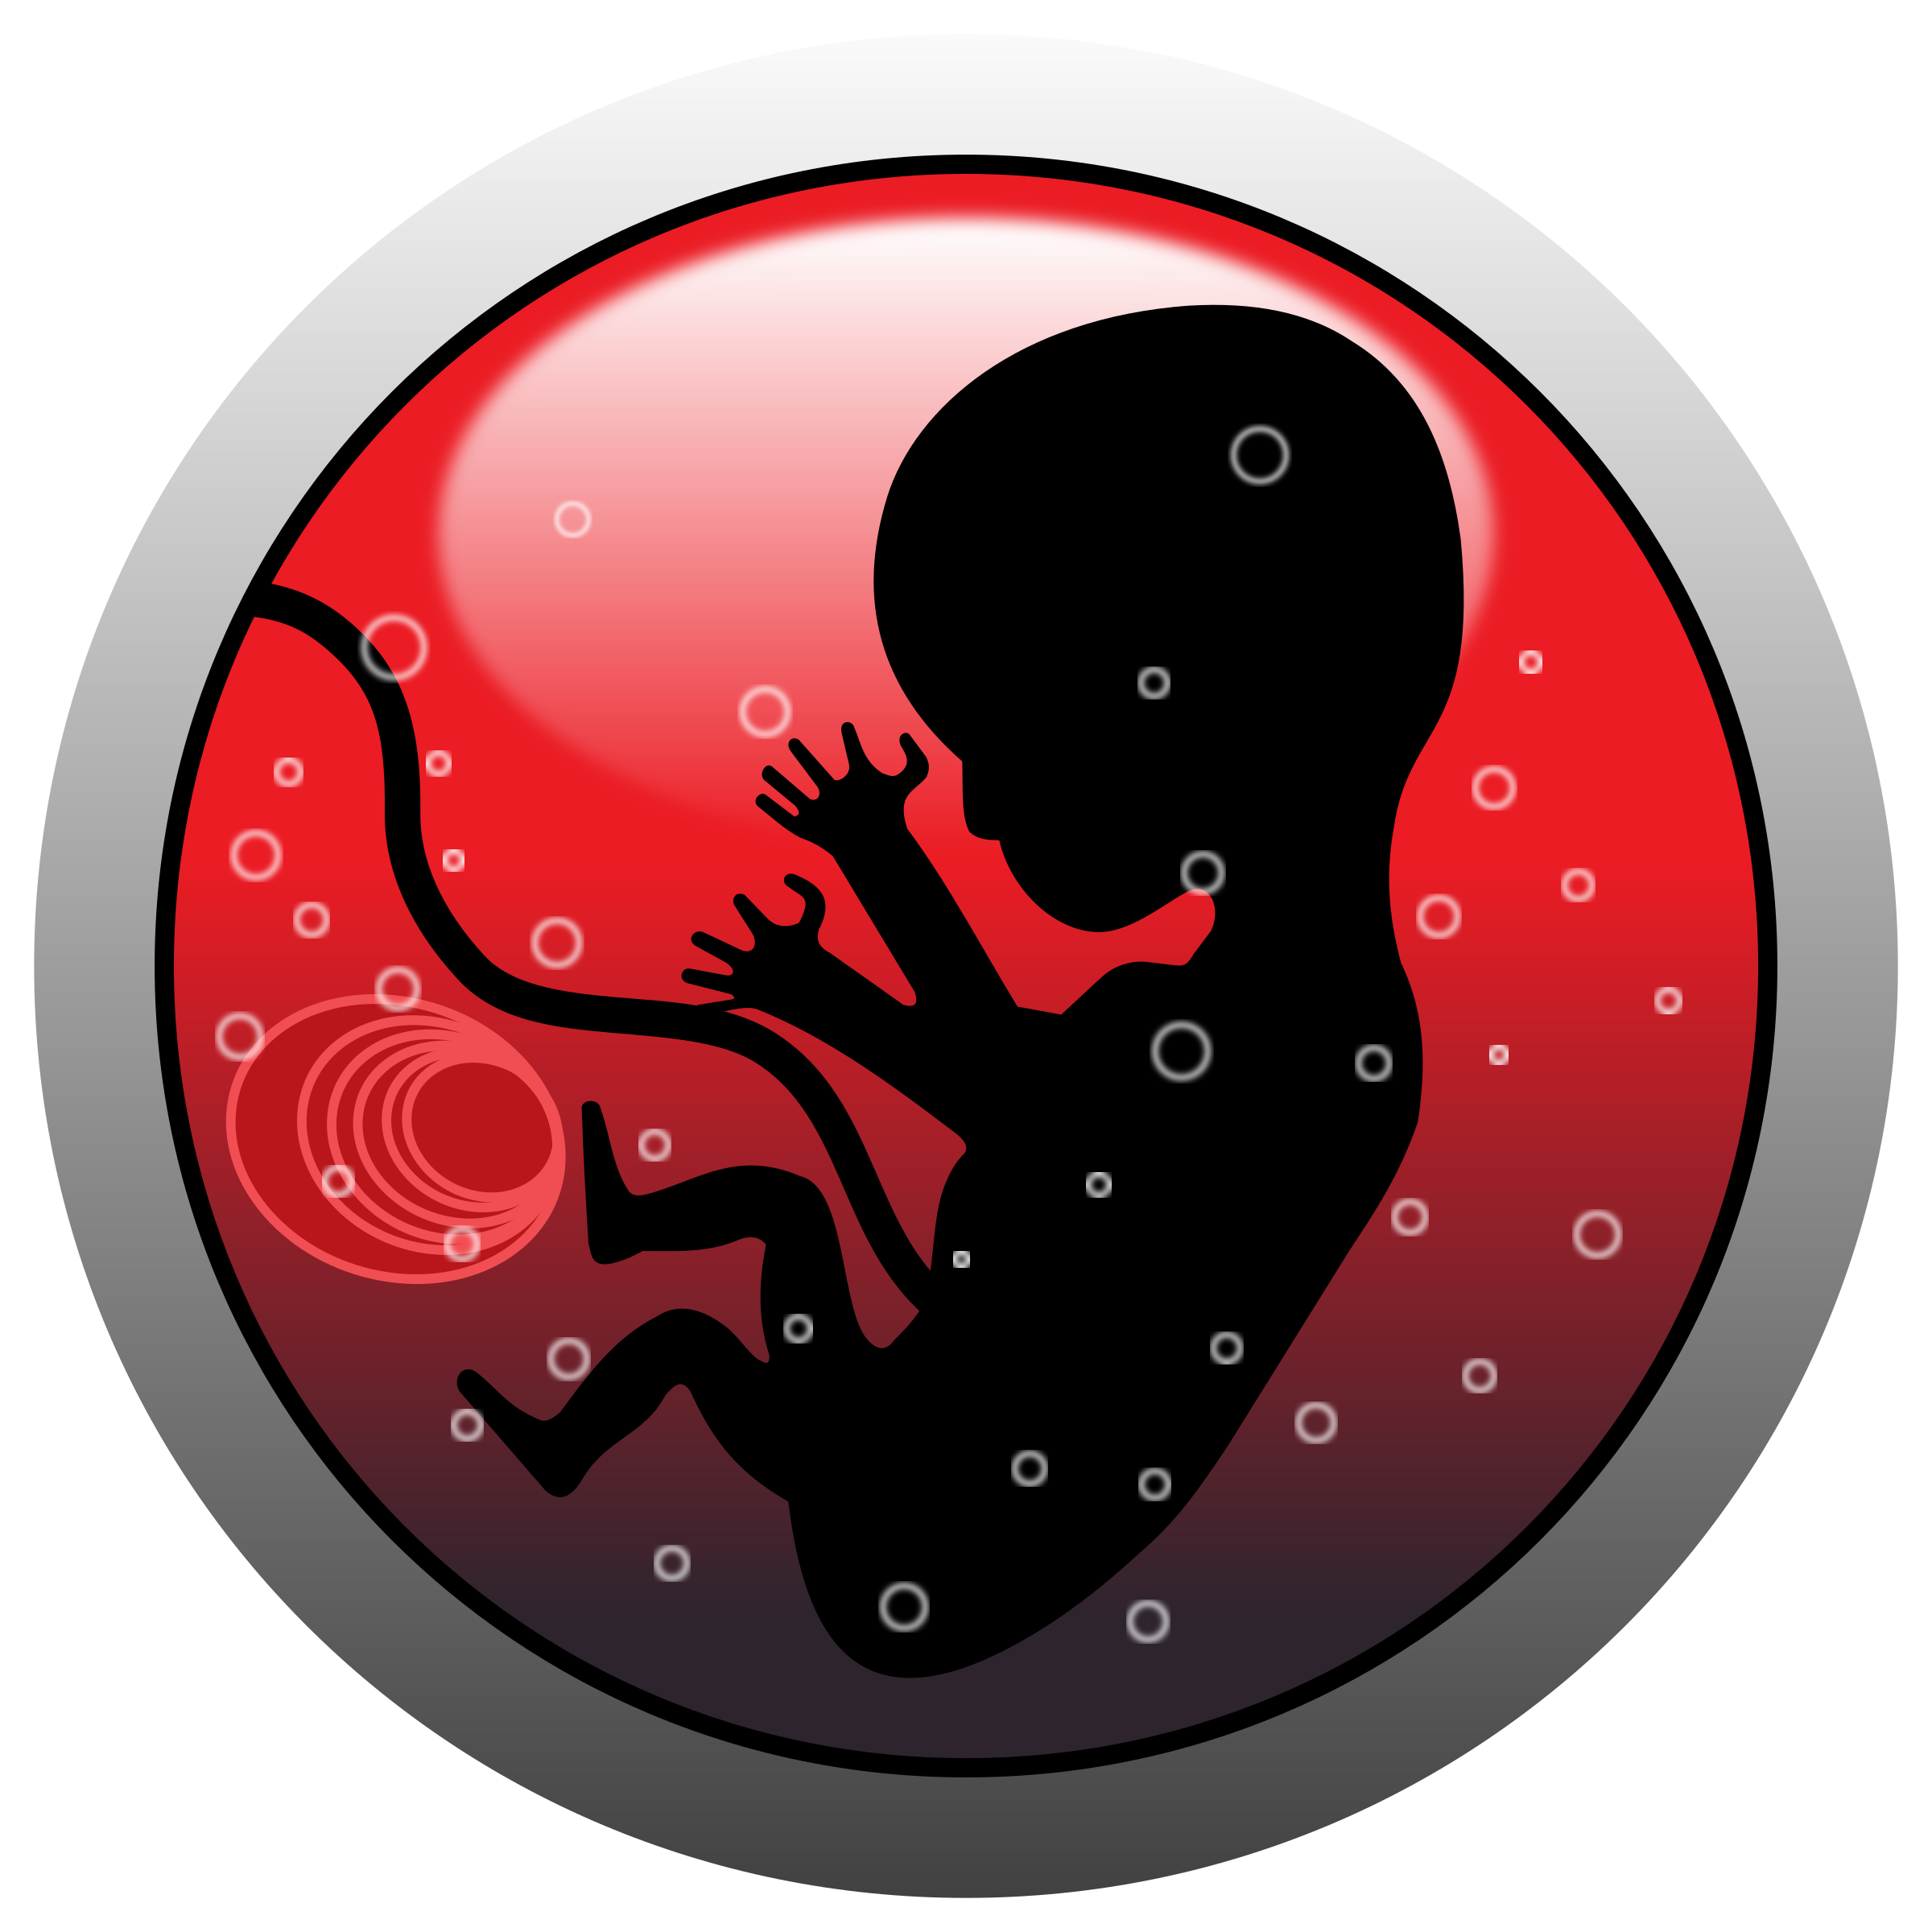 Human clipart human silhouette. Baby womb graphics illustrations